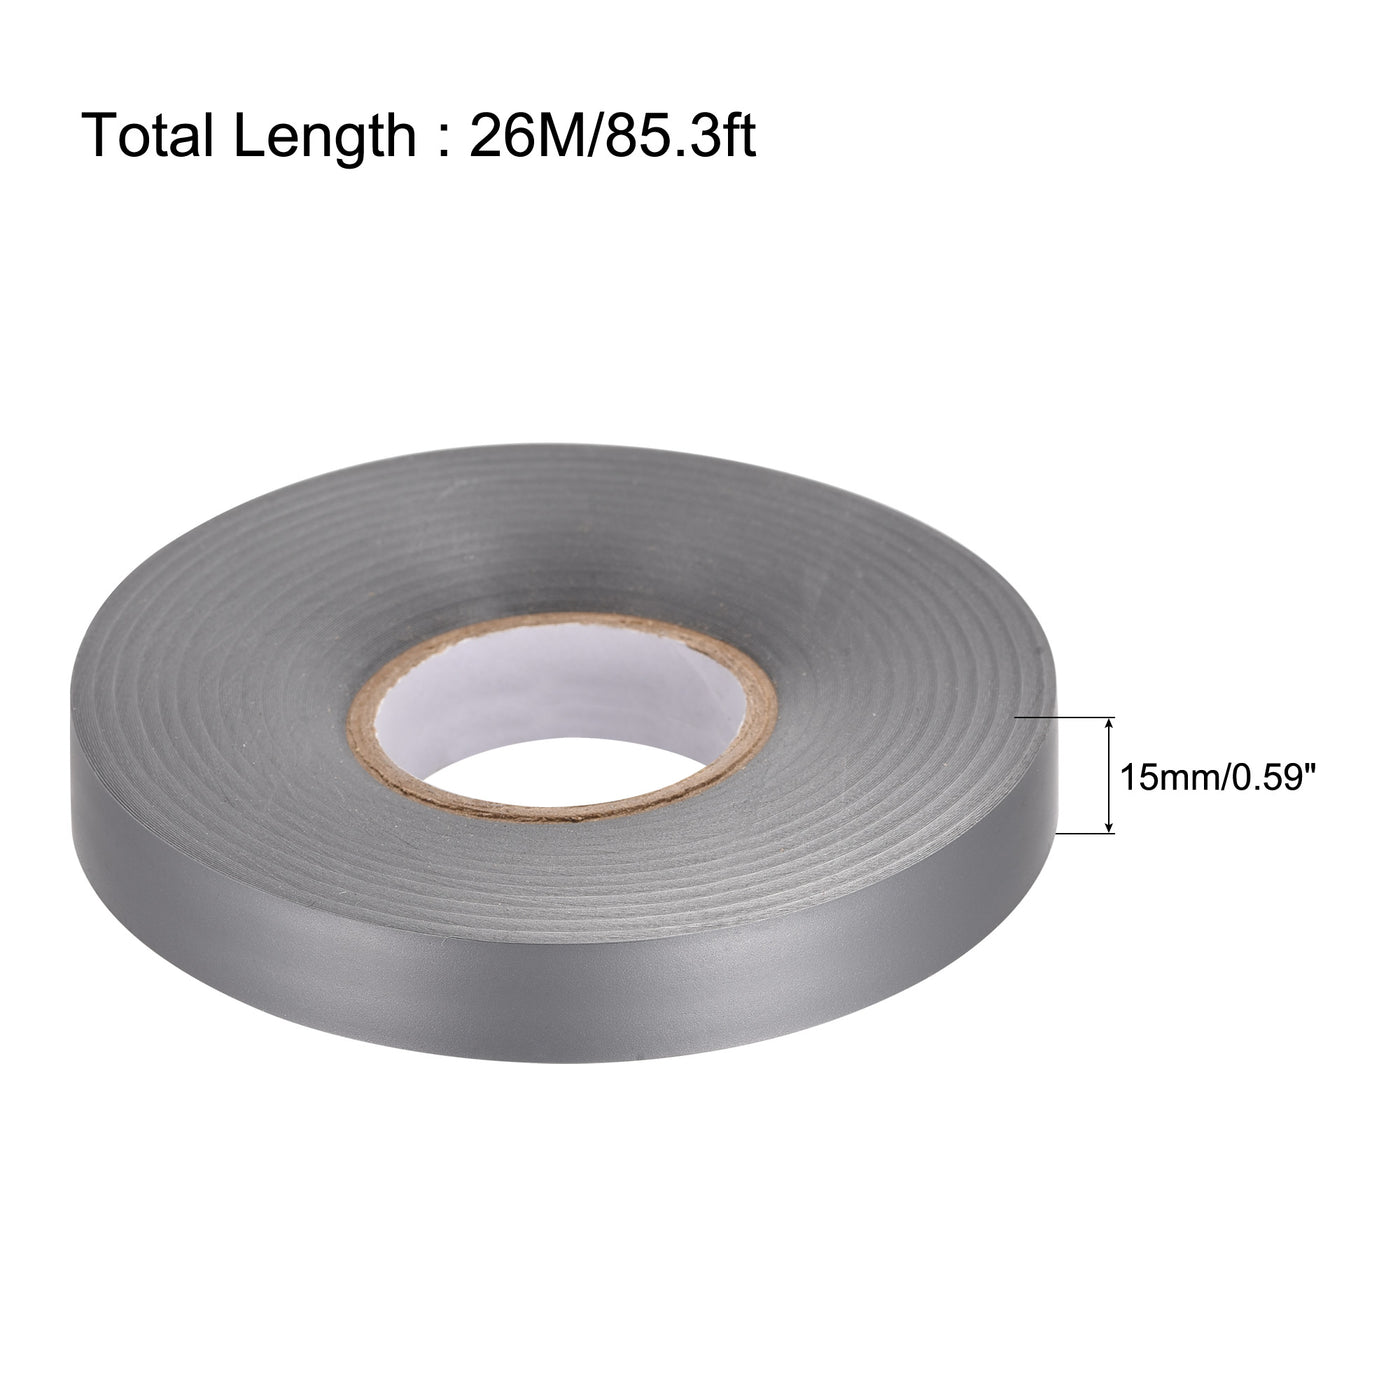 uxcell Uxcell Insulating Tape 15mm Width 26M Long 0.26mm Thick PVC Electrical Tape Grey